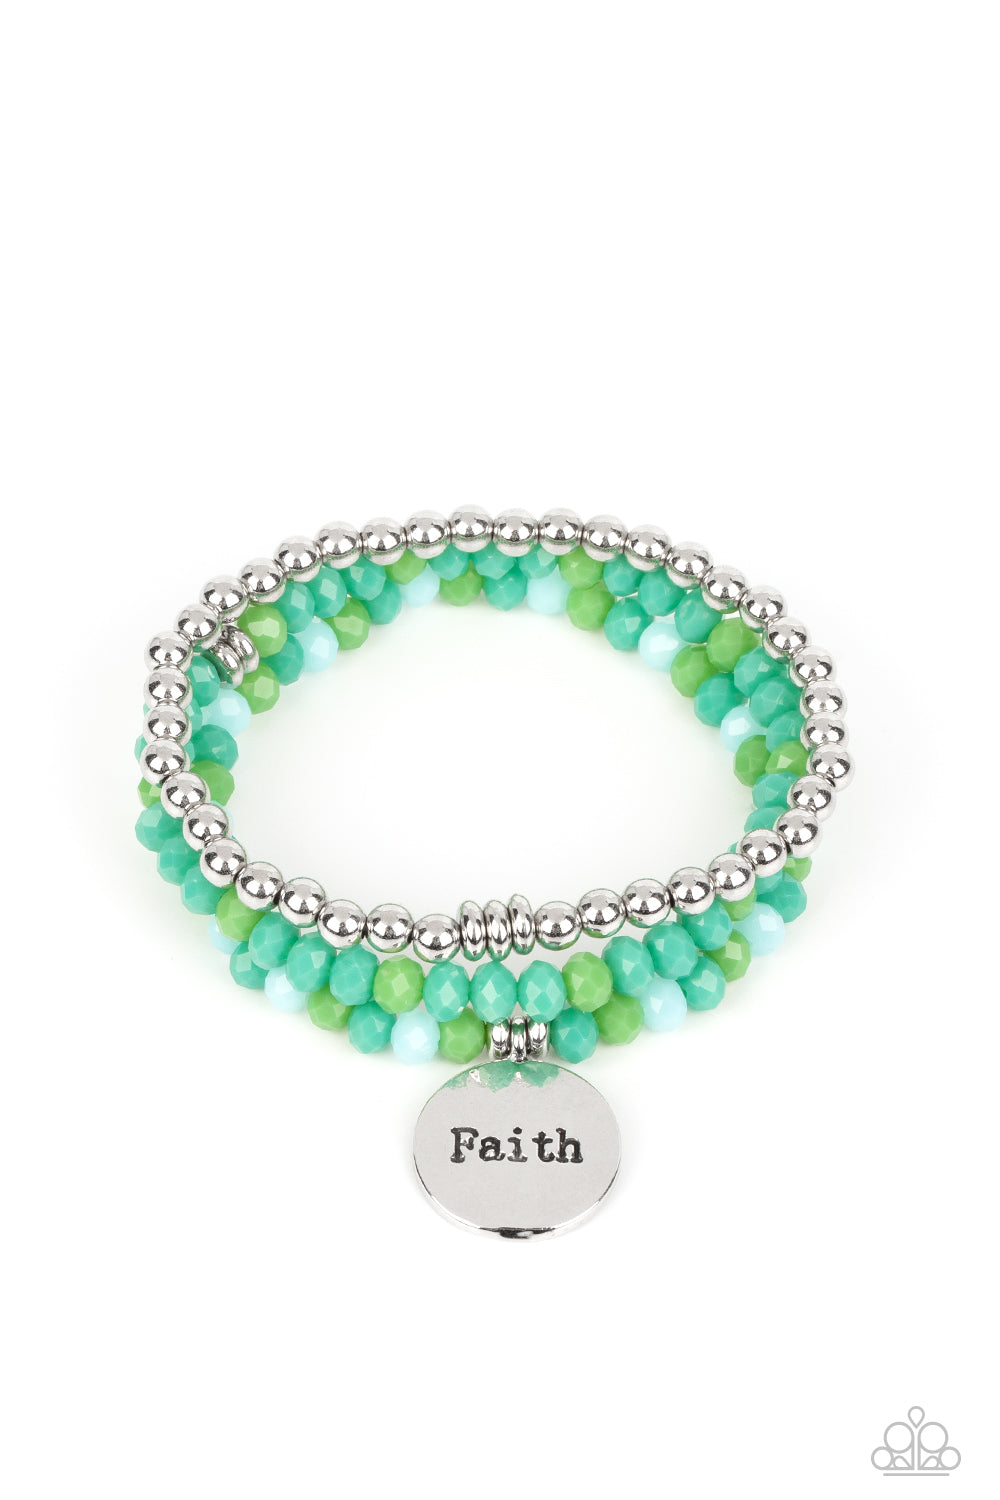 Fashionable Faith - Green and Silver Inspiration Bracelet - Paparazzi Accessories - Embellished with silver and defaced beads in varying shades of green, three bracelets are threaded along elastic stretchy bands, for a fashionable stack across the wrist. Falling from one of the varying green bangles, a silver disc, with a hammered sheen, features the word "Faith," creating a simplistic collision of color and energy for a light-hearted finish. Sold as one individual bracelet.